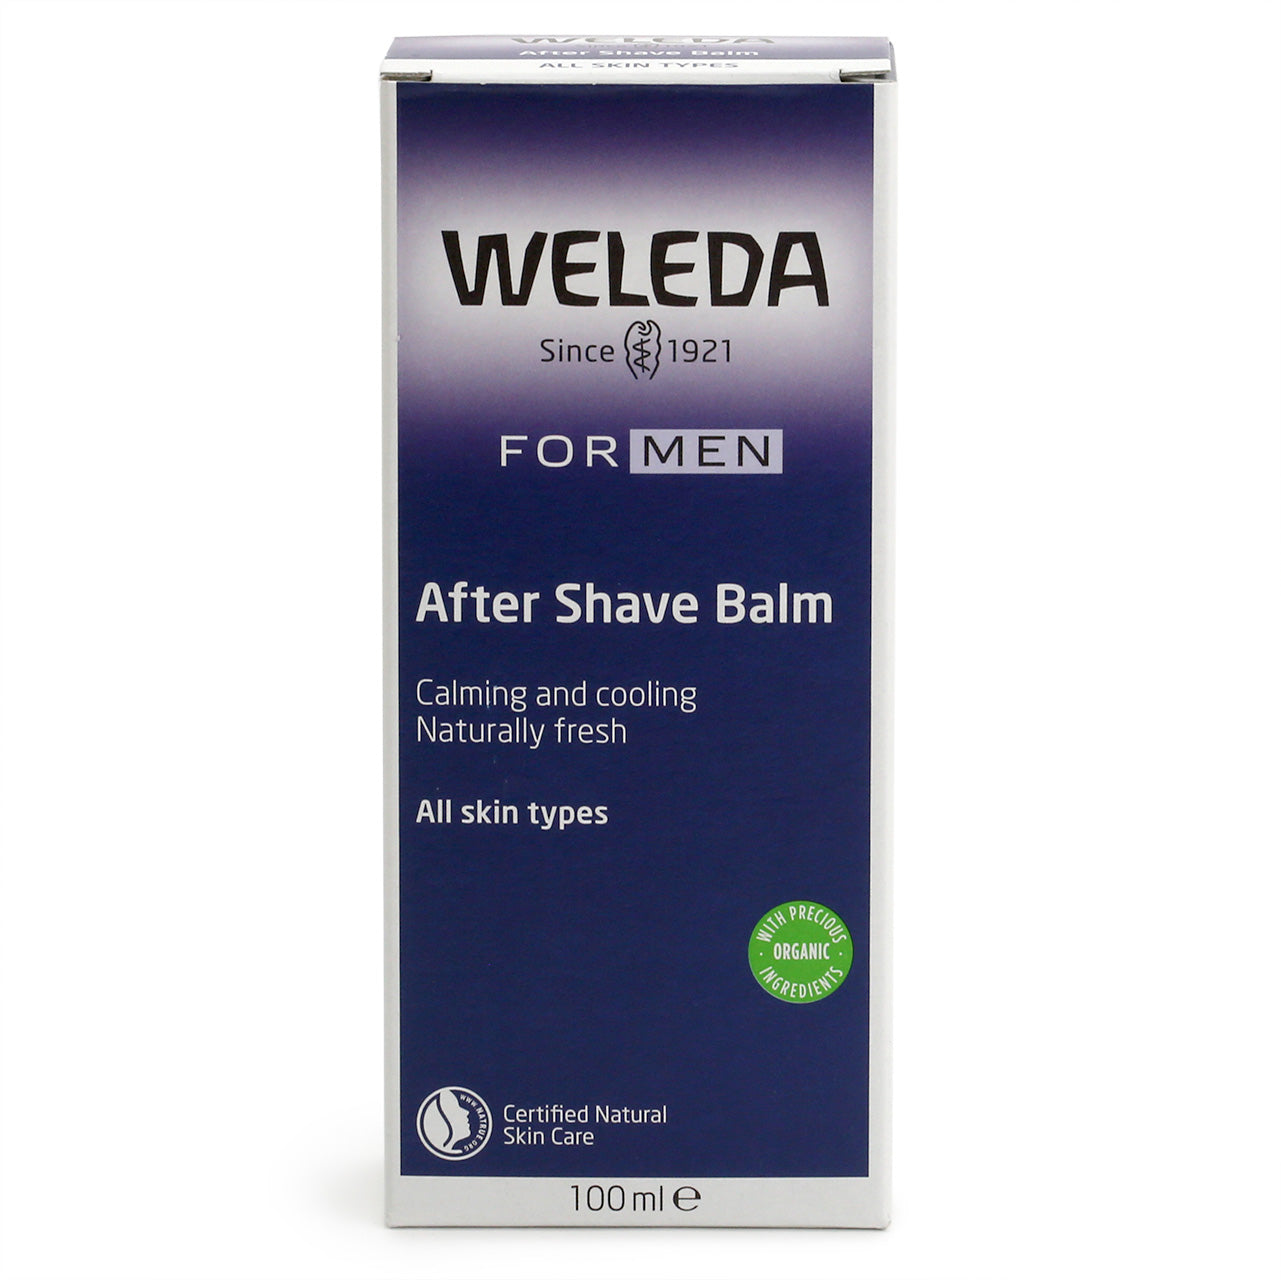 Weleda For Men After Shave Balm, green bottle with white cap and Blue label